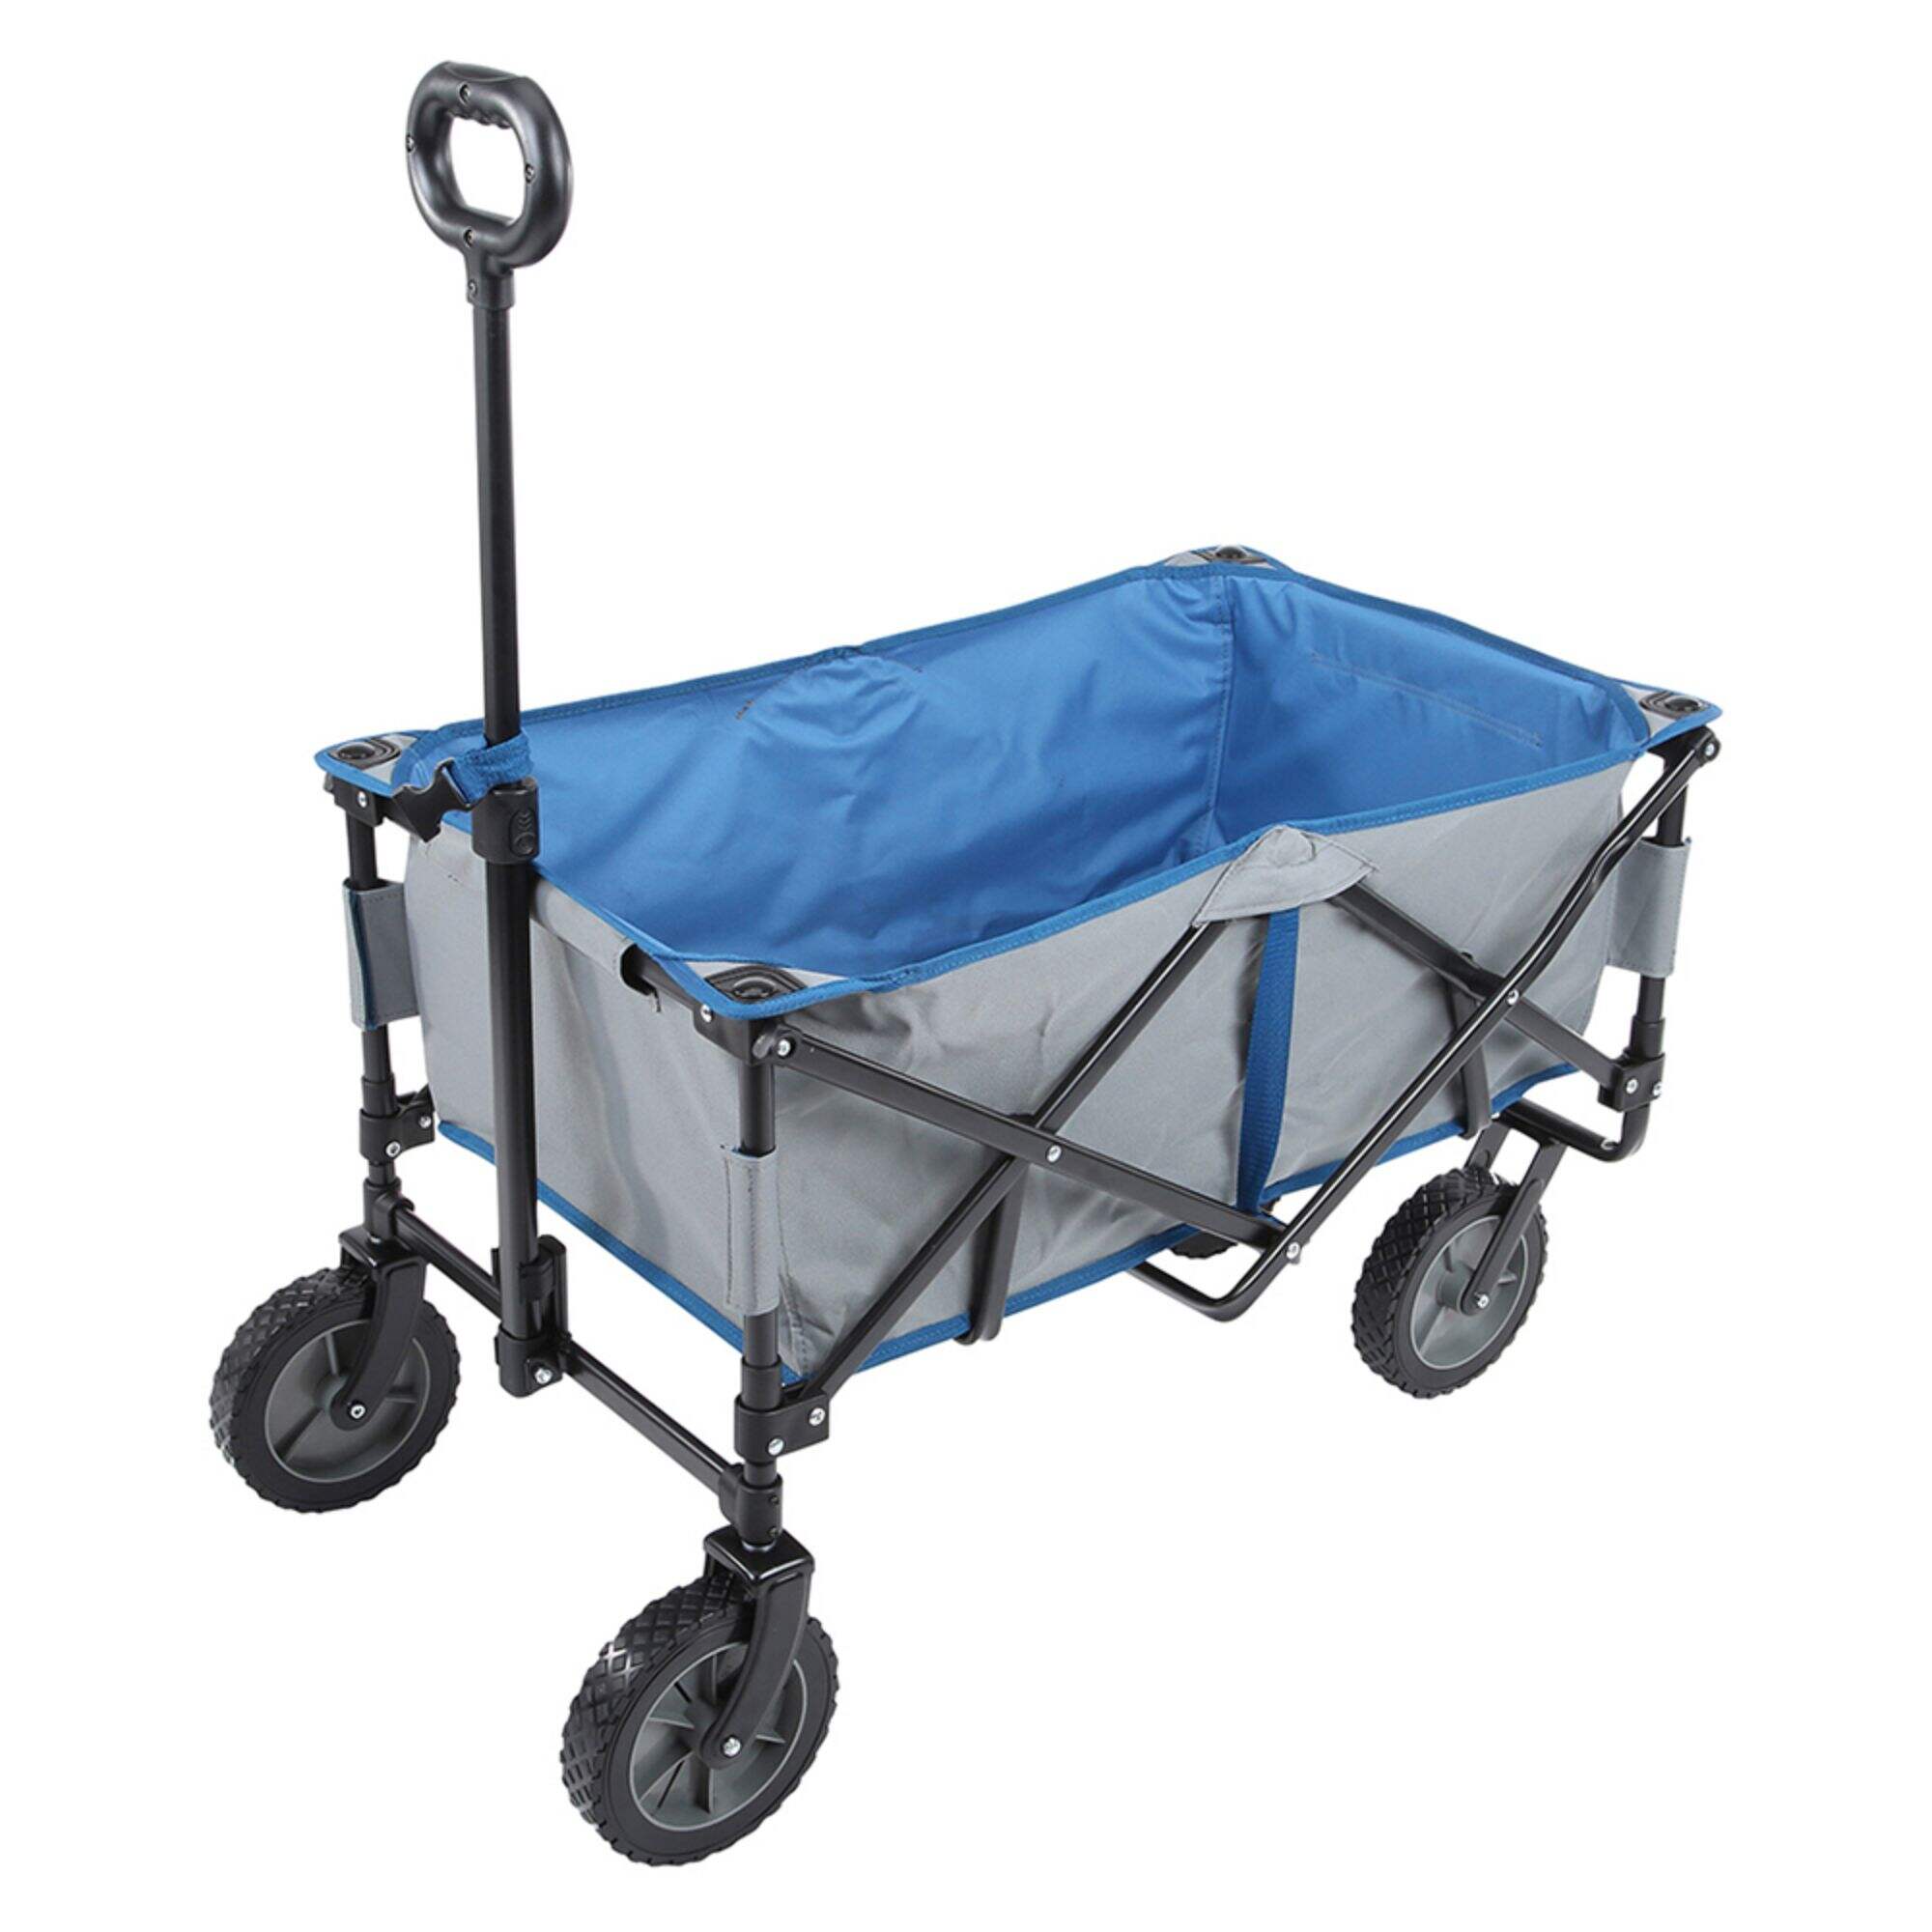 GT1811 Folding Wagon, Collapsible Camping Wagon Cart, for Outdoor Garden